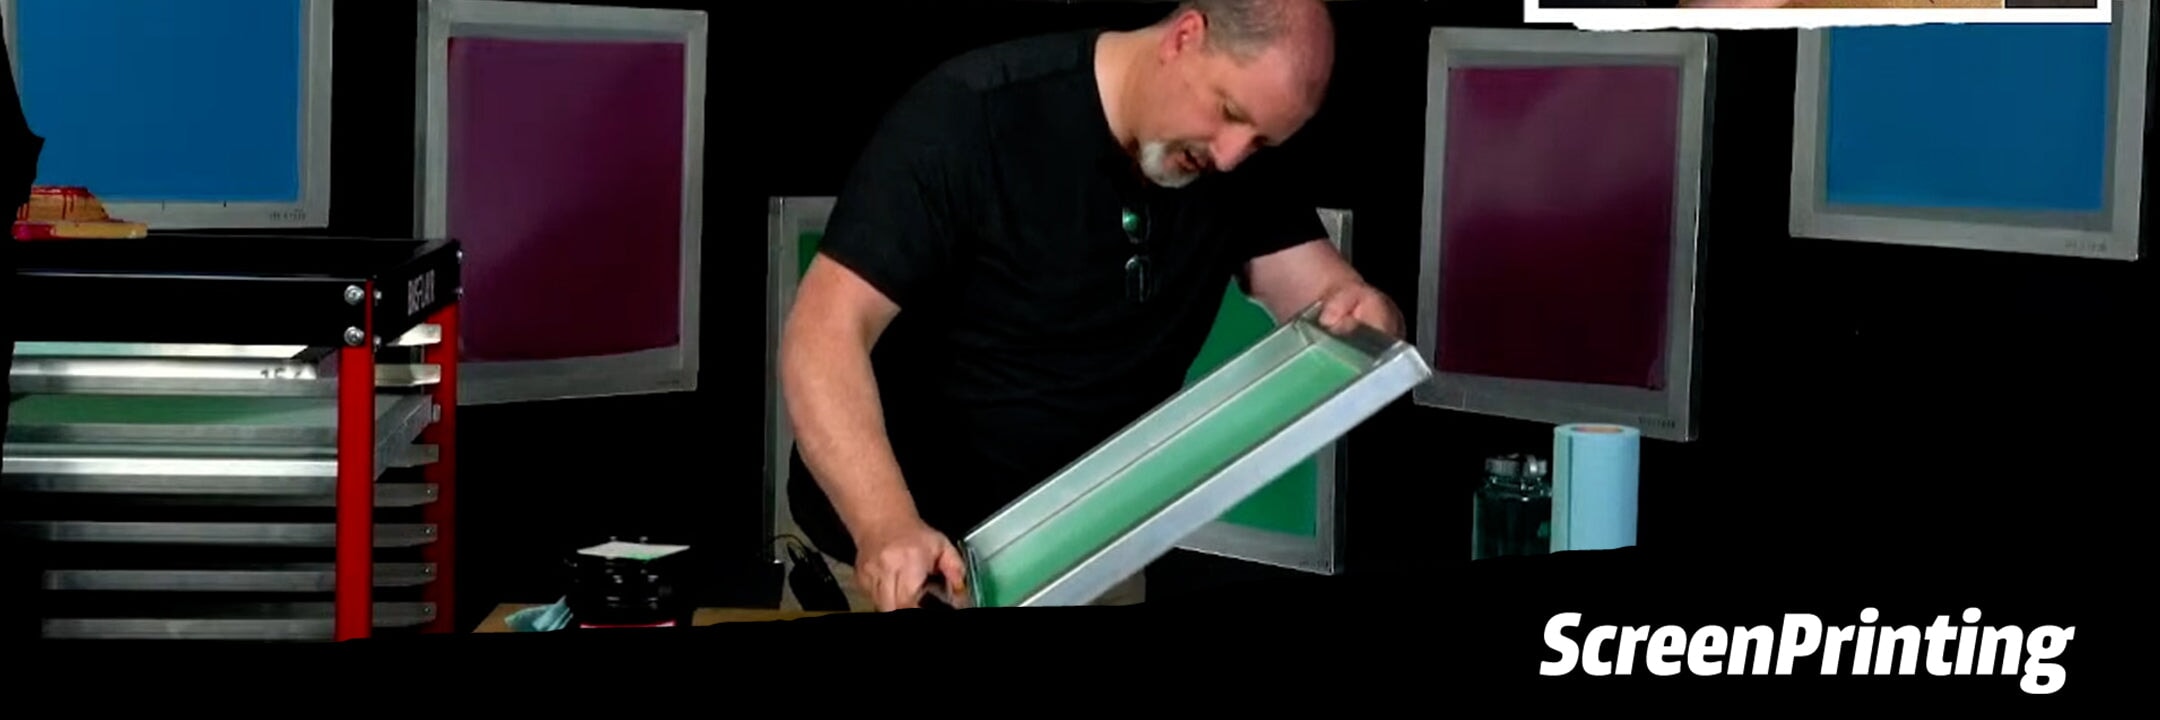 The Basics of Mixing Emulsion and Coating a Screen